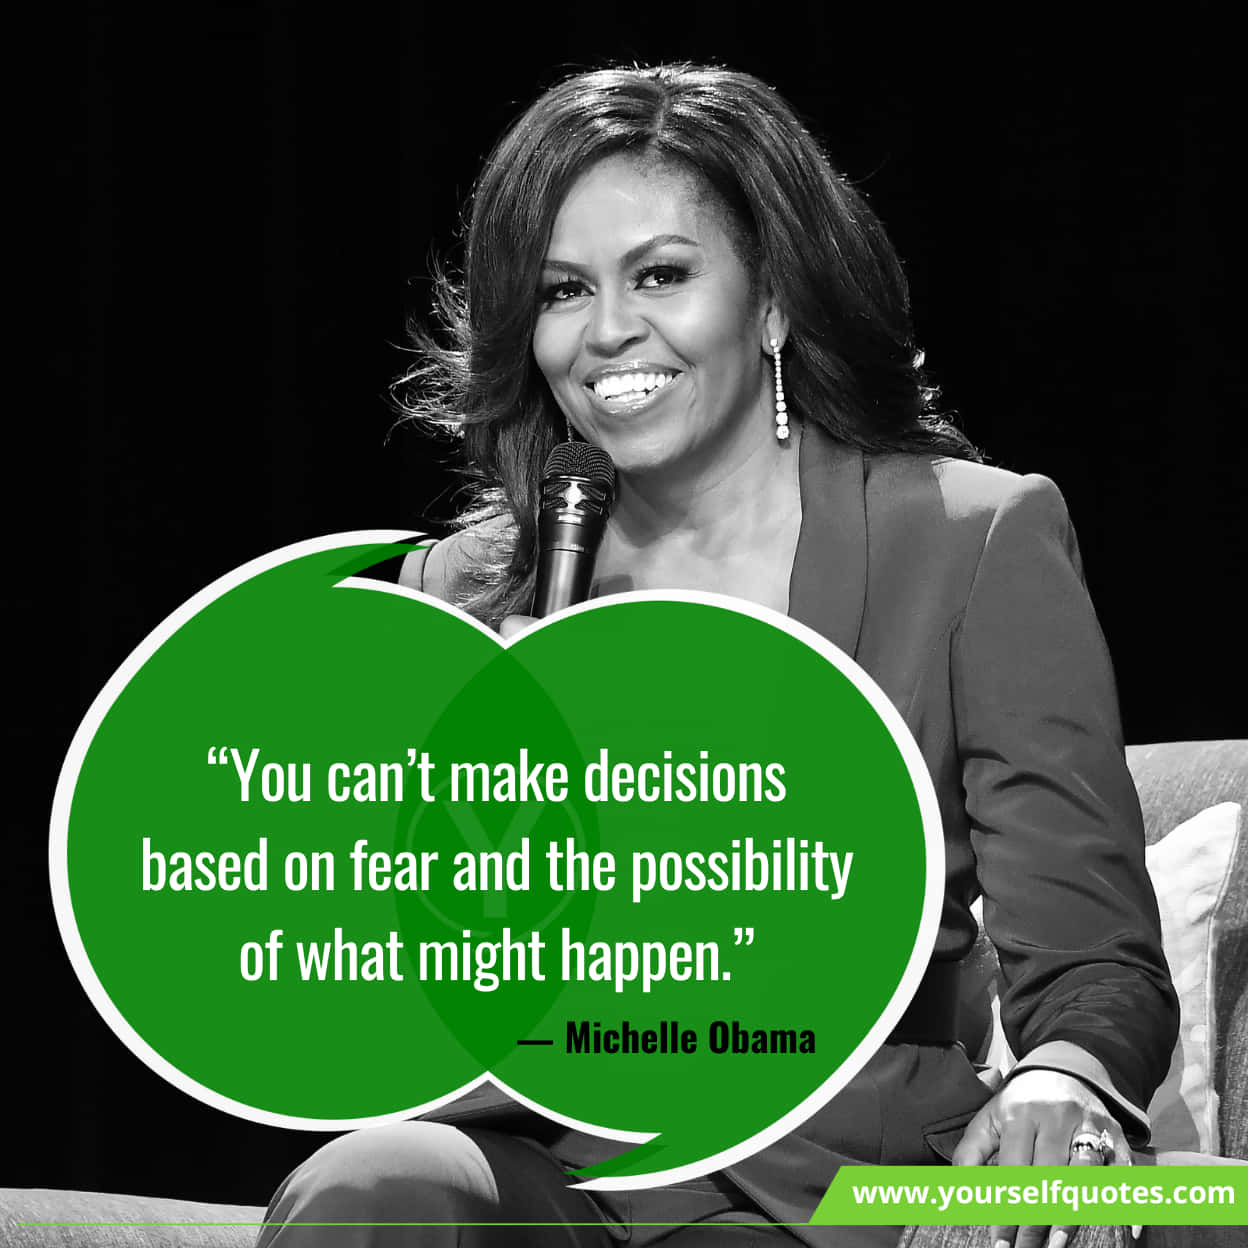 Michelle Obama Quotes For Success